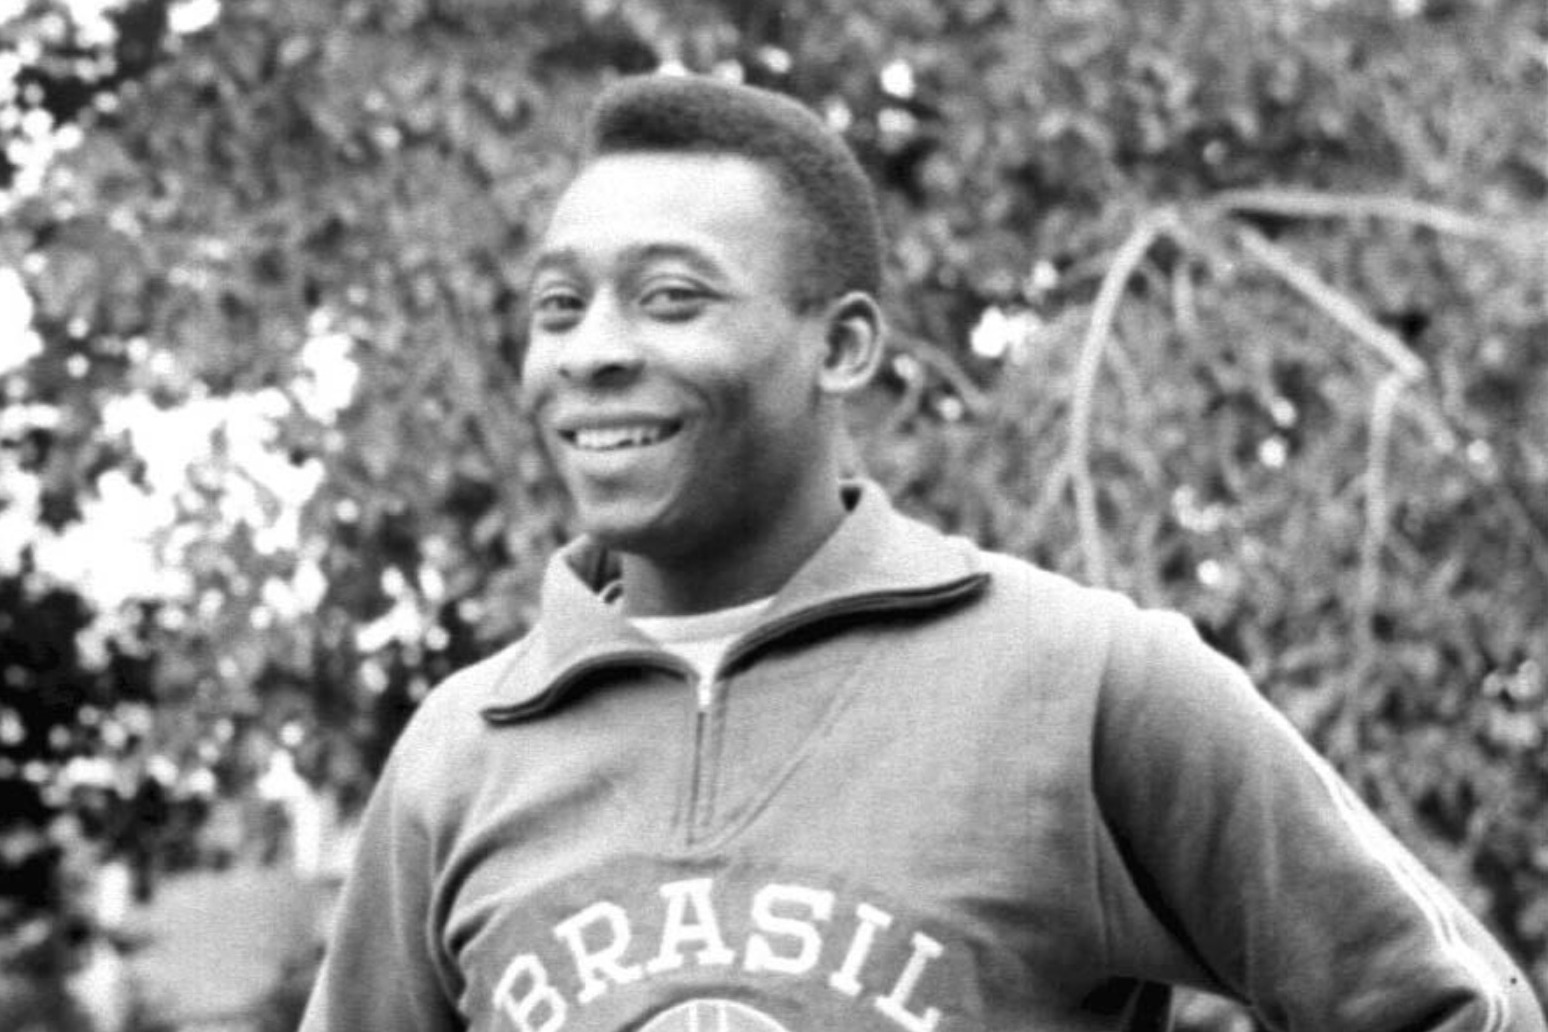 Brazilian football legend Pele has died at the age of 82 